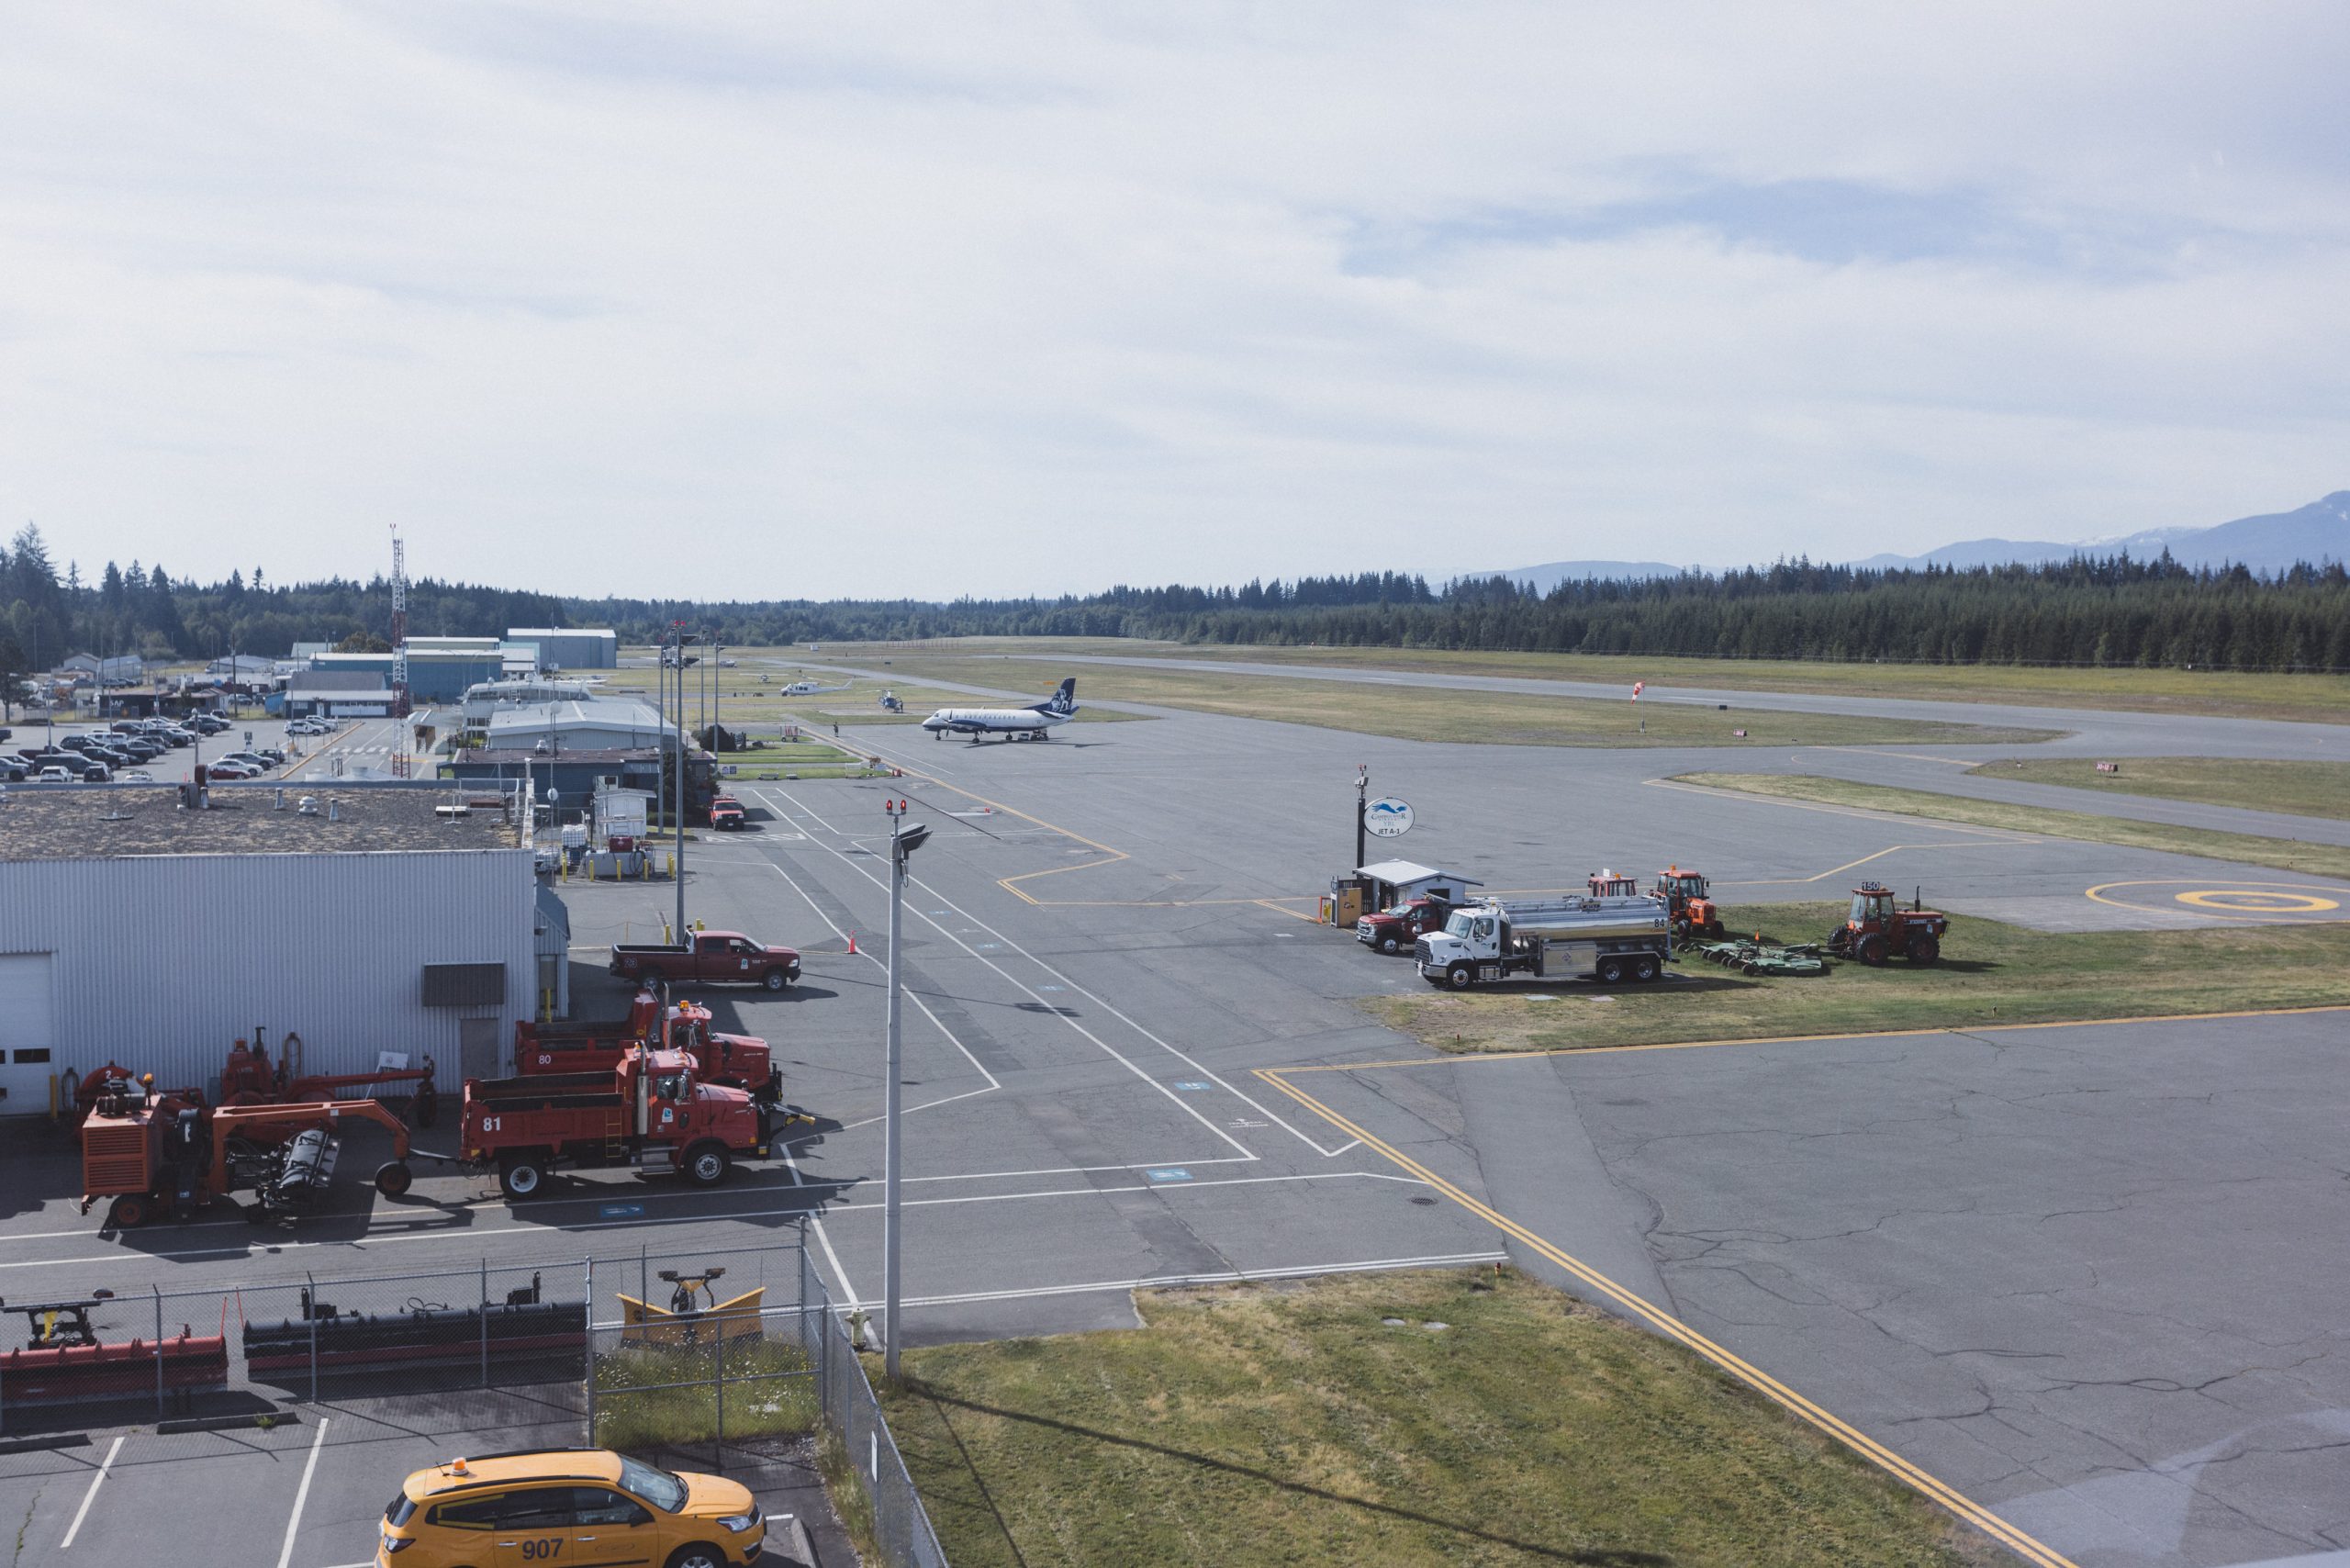 Airport runways and taxiways